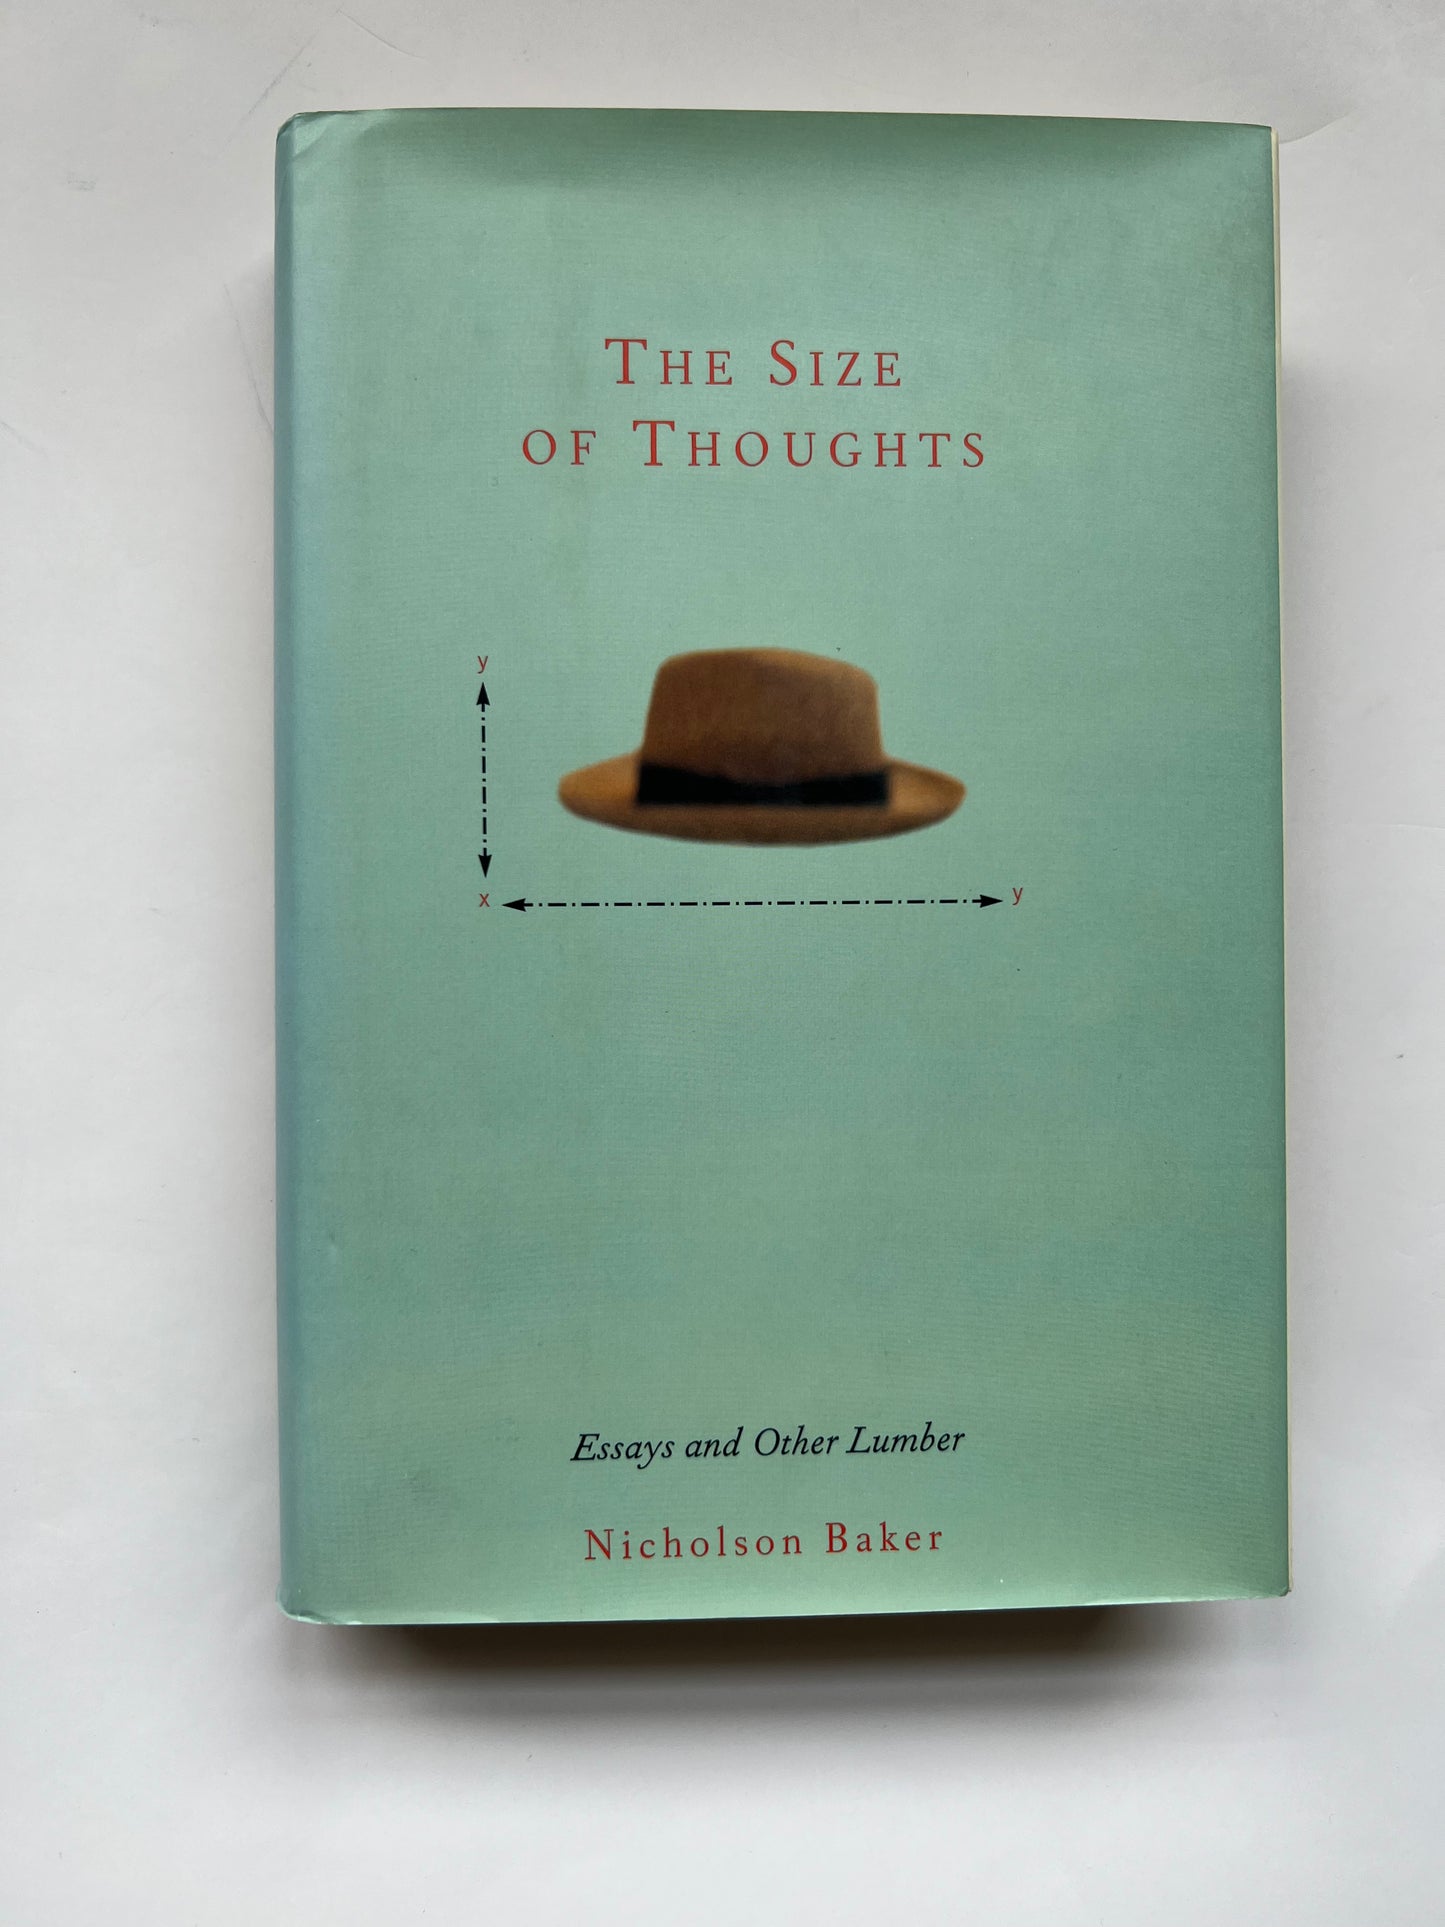 The Size of Thoughts